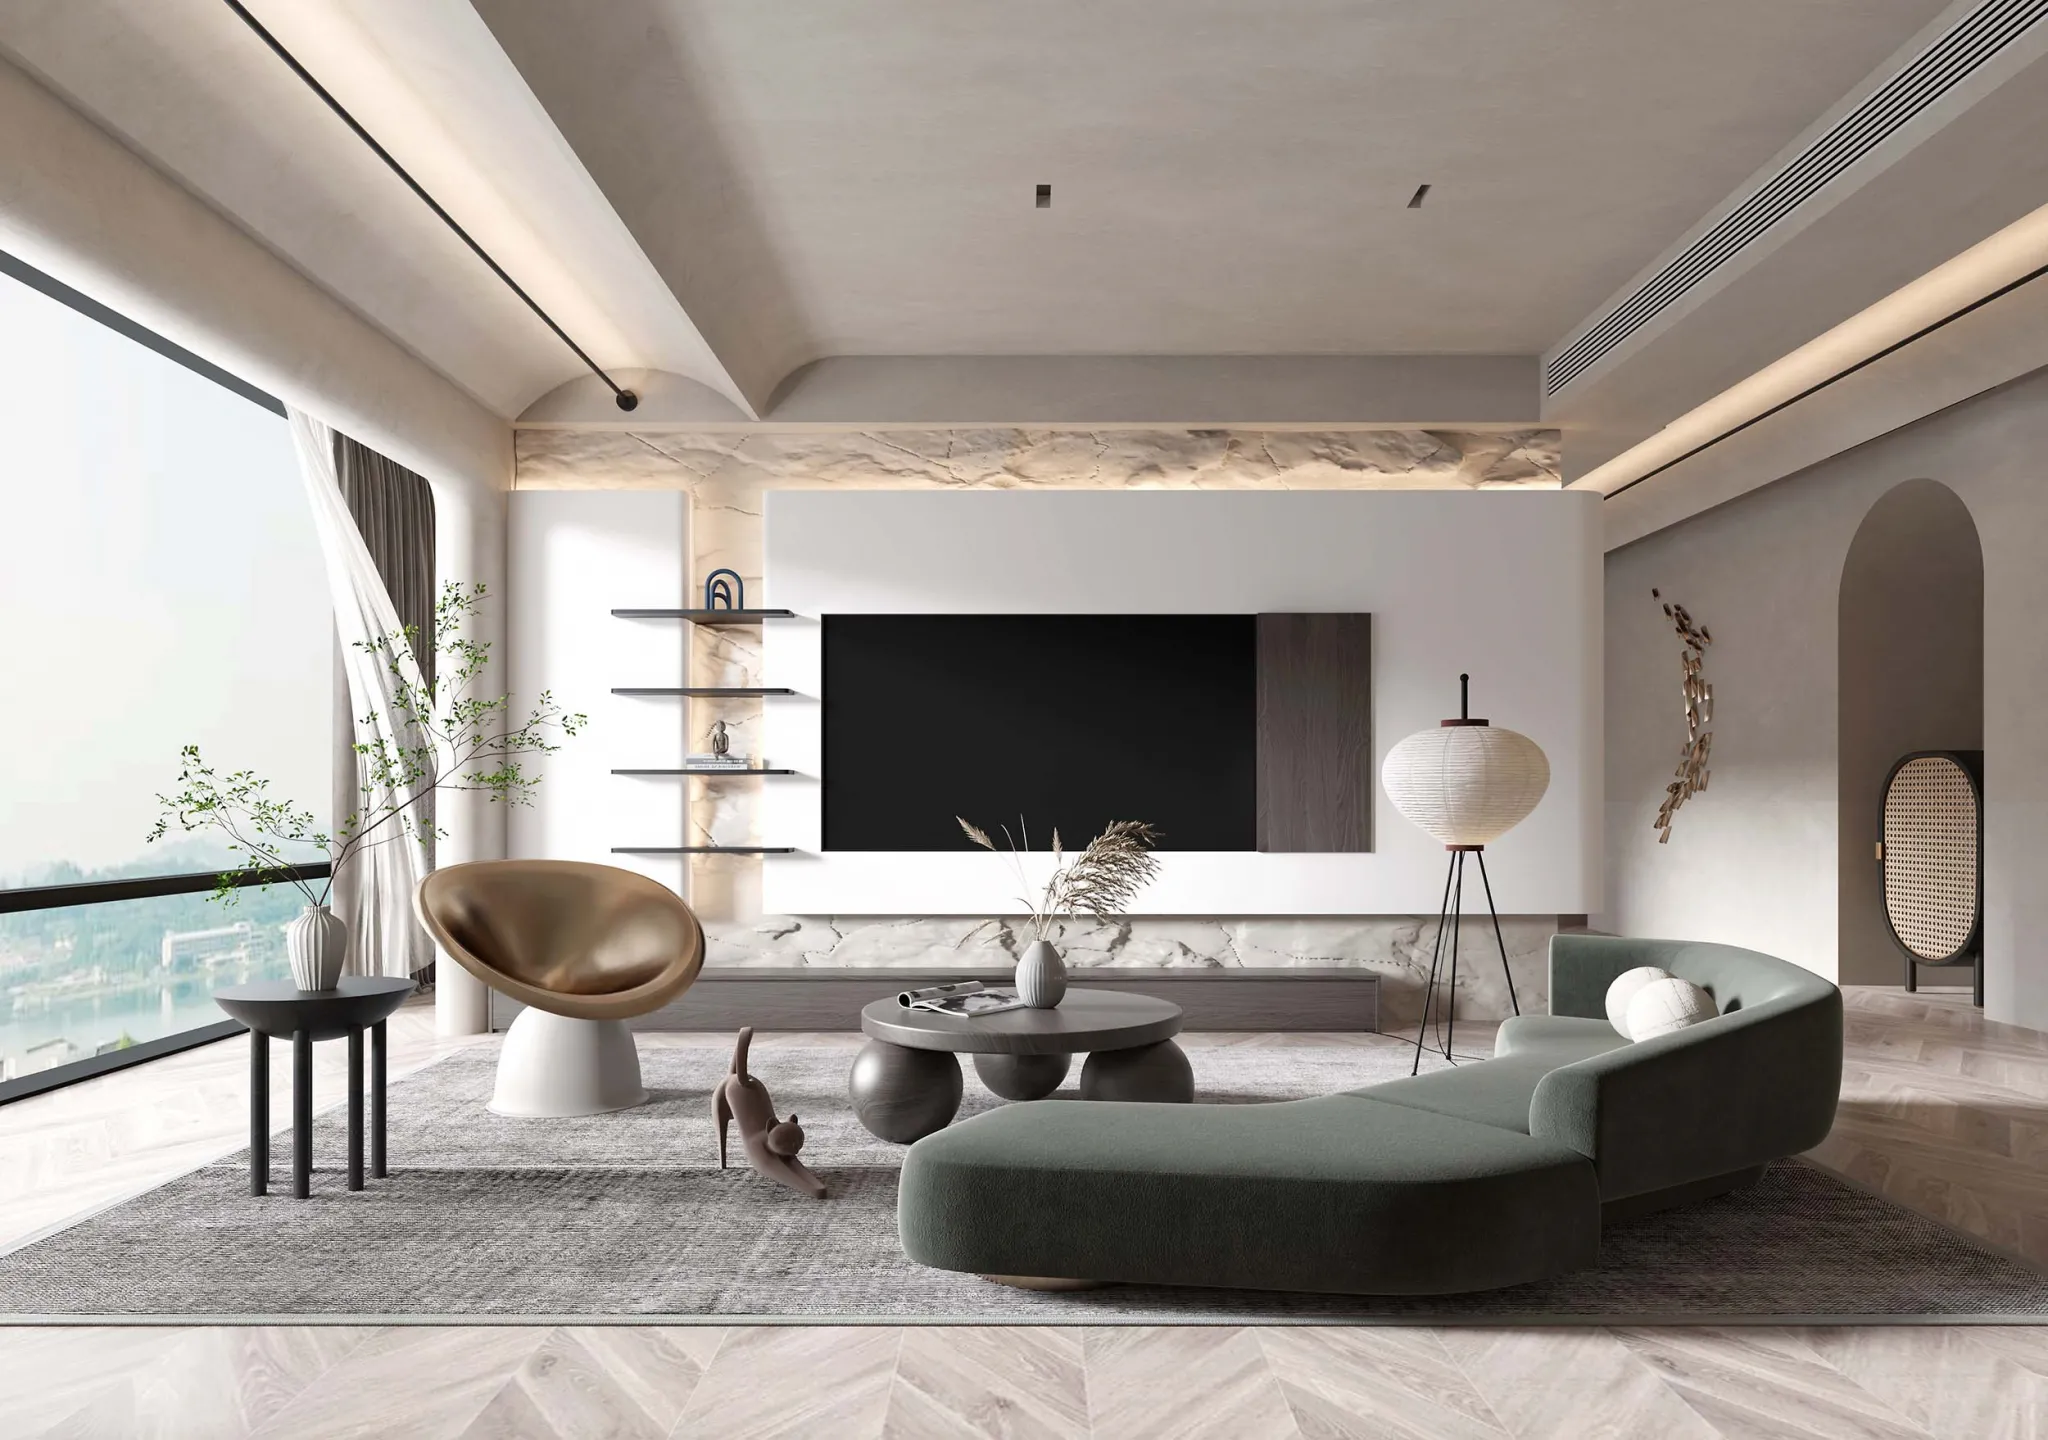 HOUSE SPACE 3D SCENES – LIVING ROOM – 0112